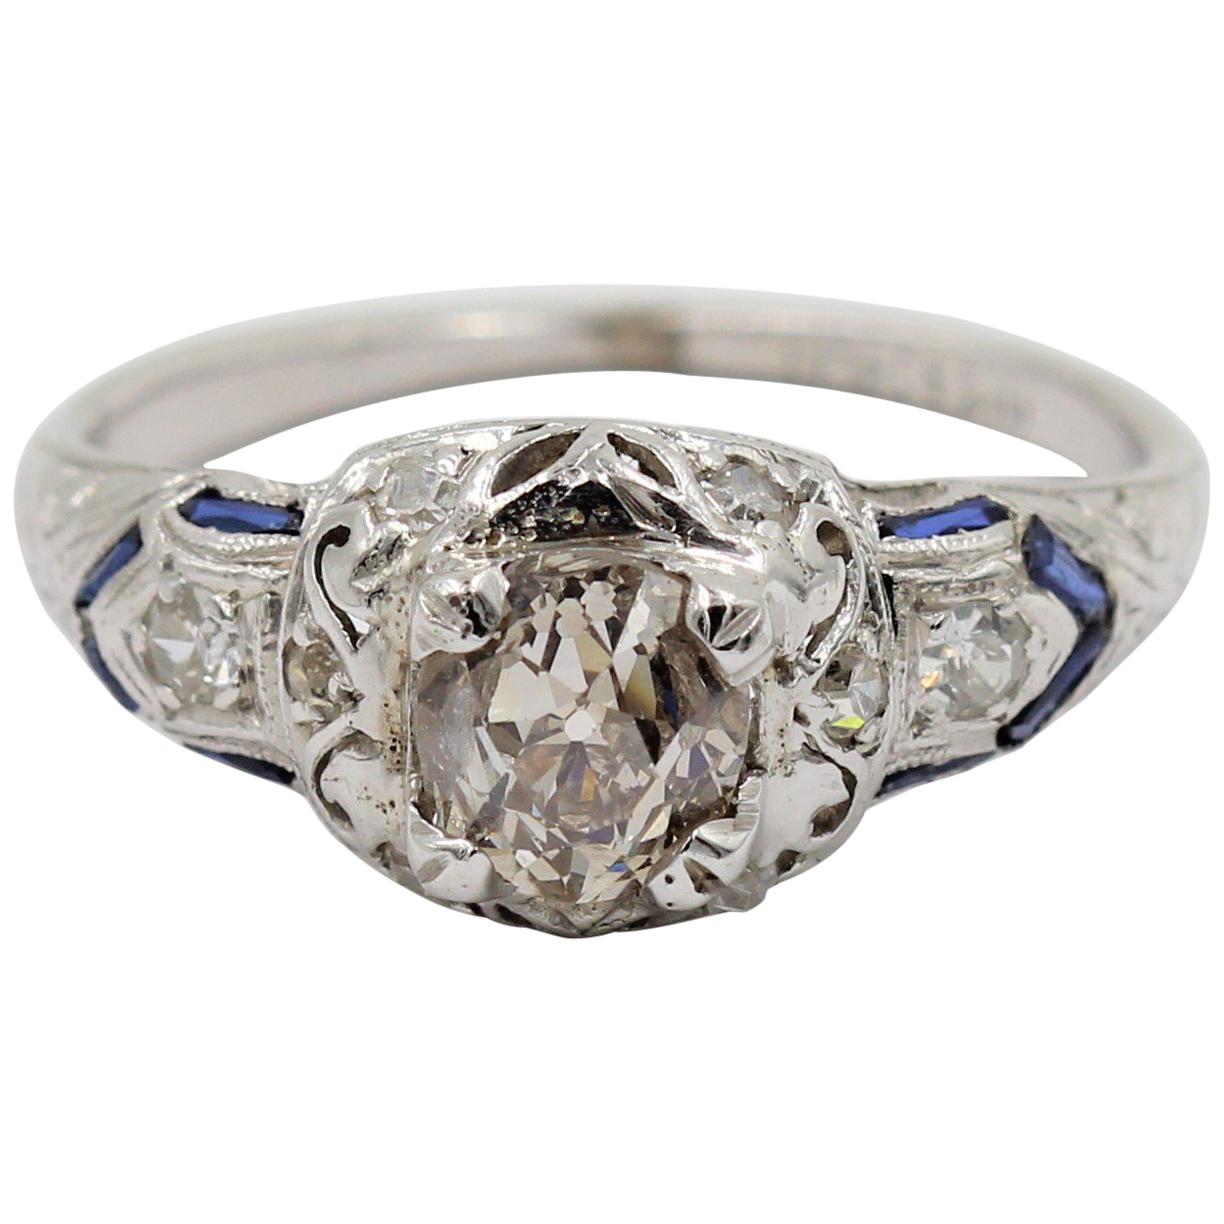 .85 Carat J/I3 Old Mine Cut Diamond Ring with Diamonds and Sapphires in Platinum For Sale